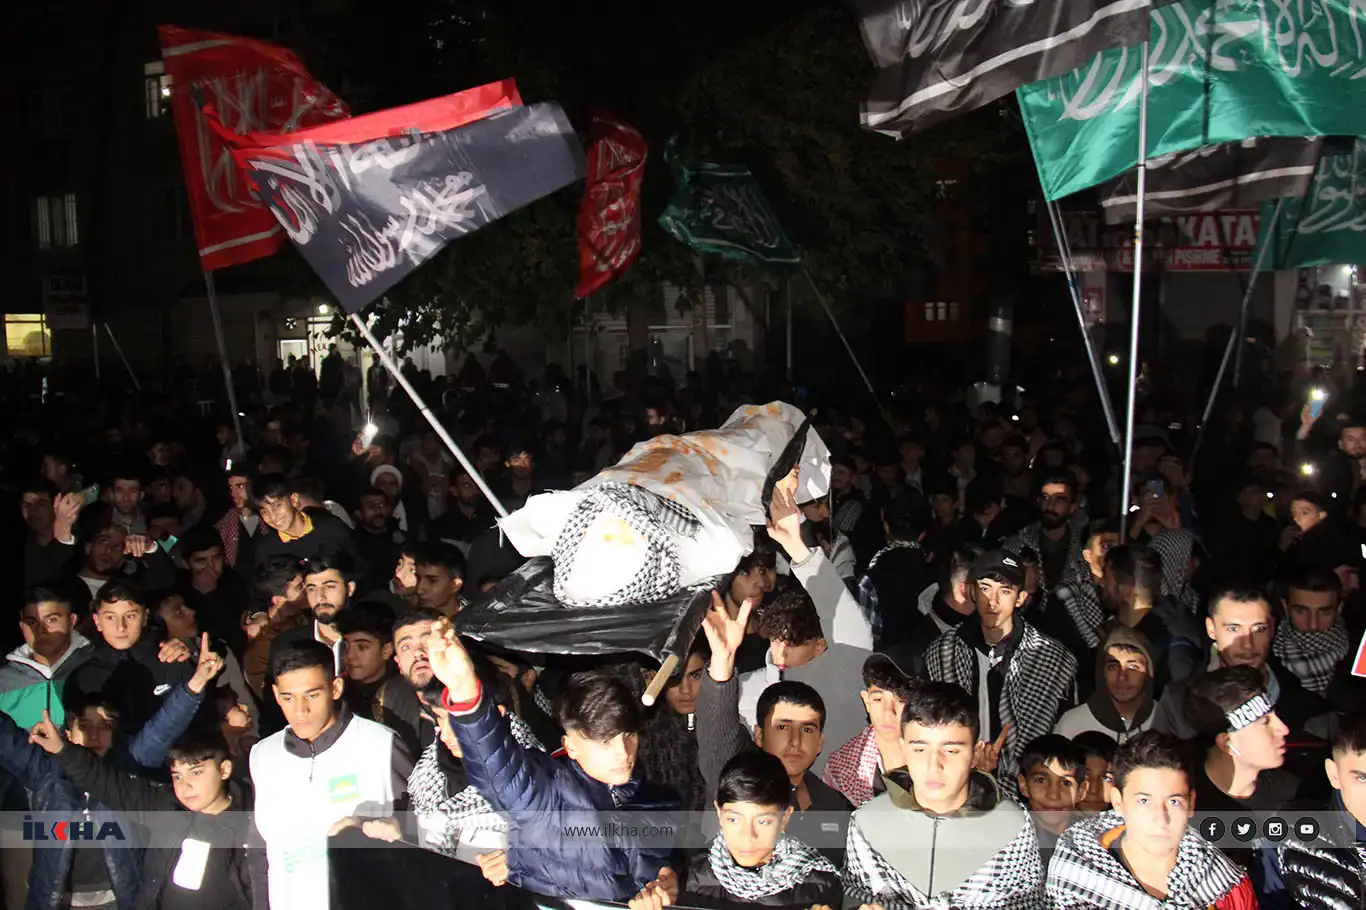 Diyarbakır youth march in solidarity with Palestine